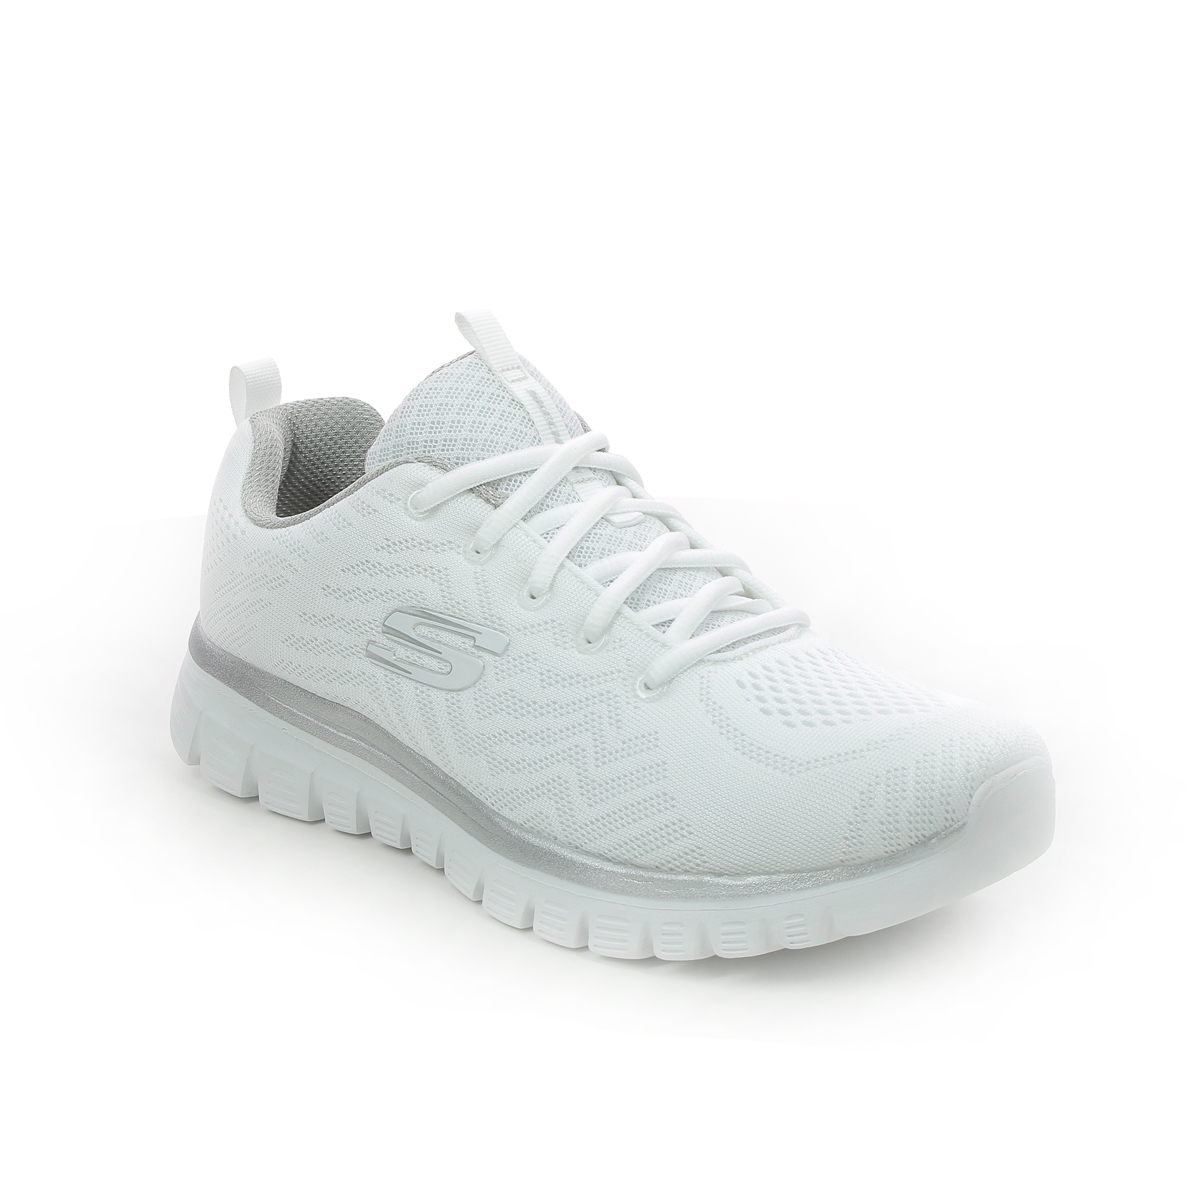 Skechers Get Connected White-Silver Womens Trainers 12615 In Size 3 In Plain White-Silver